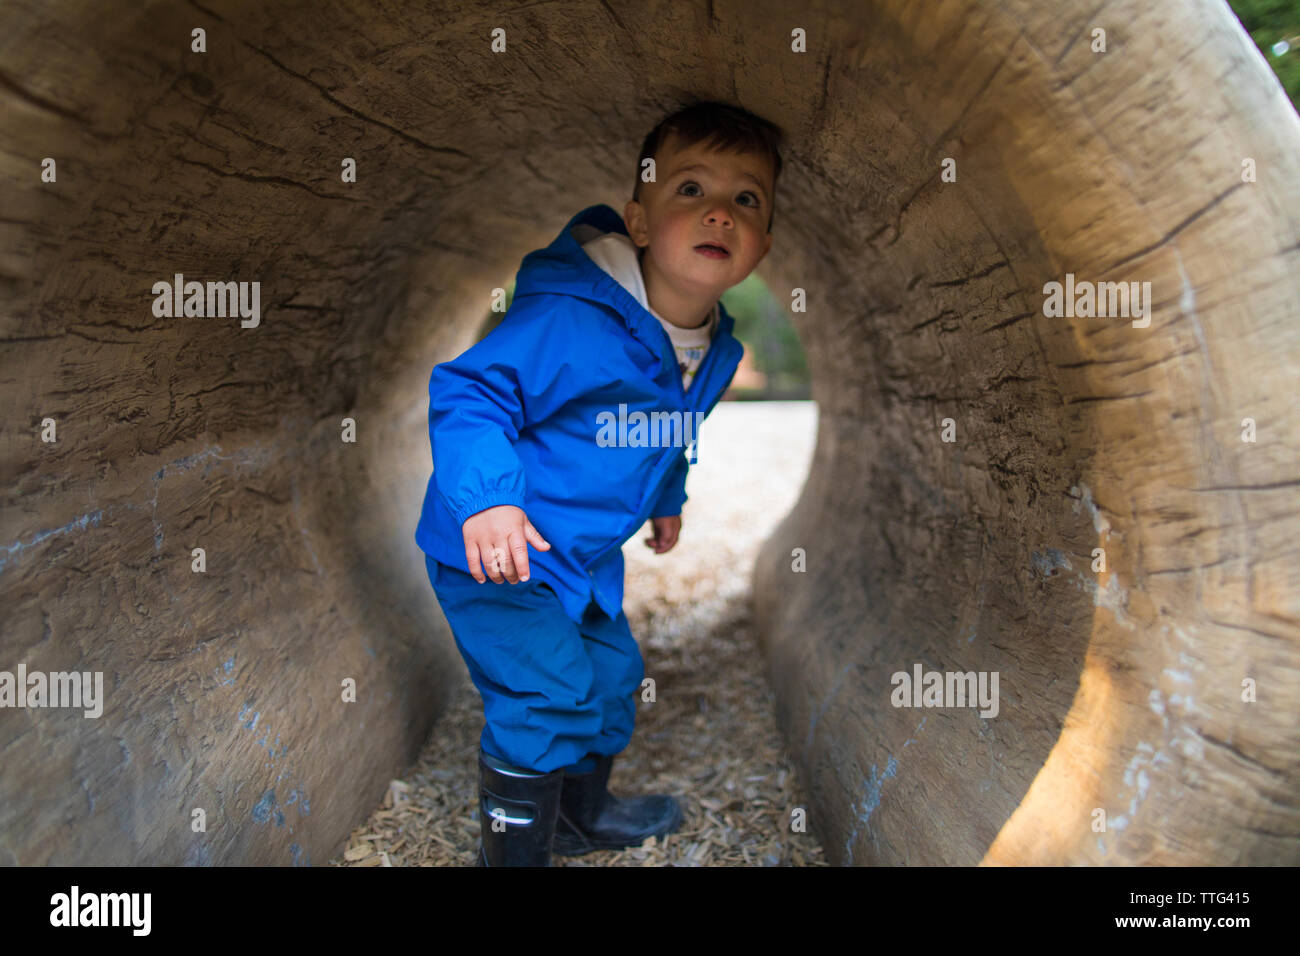 Young boy playing in tunnel in playground Stock Photo